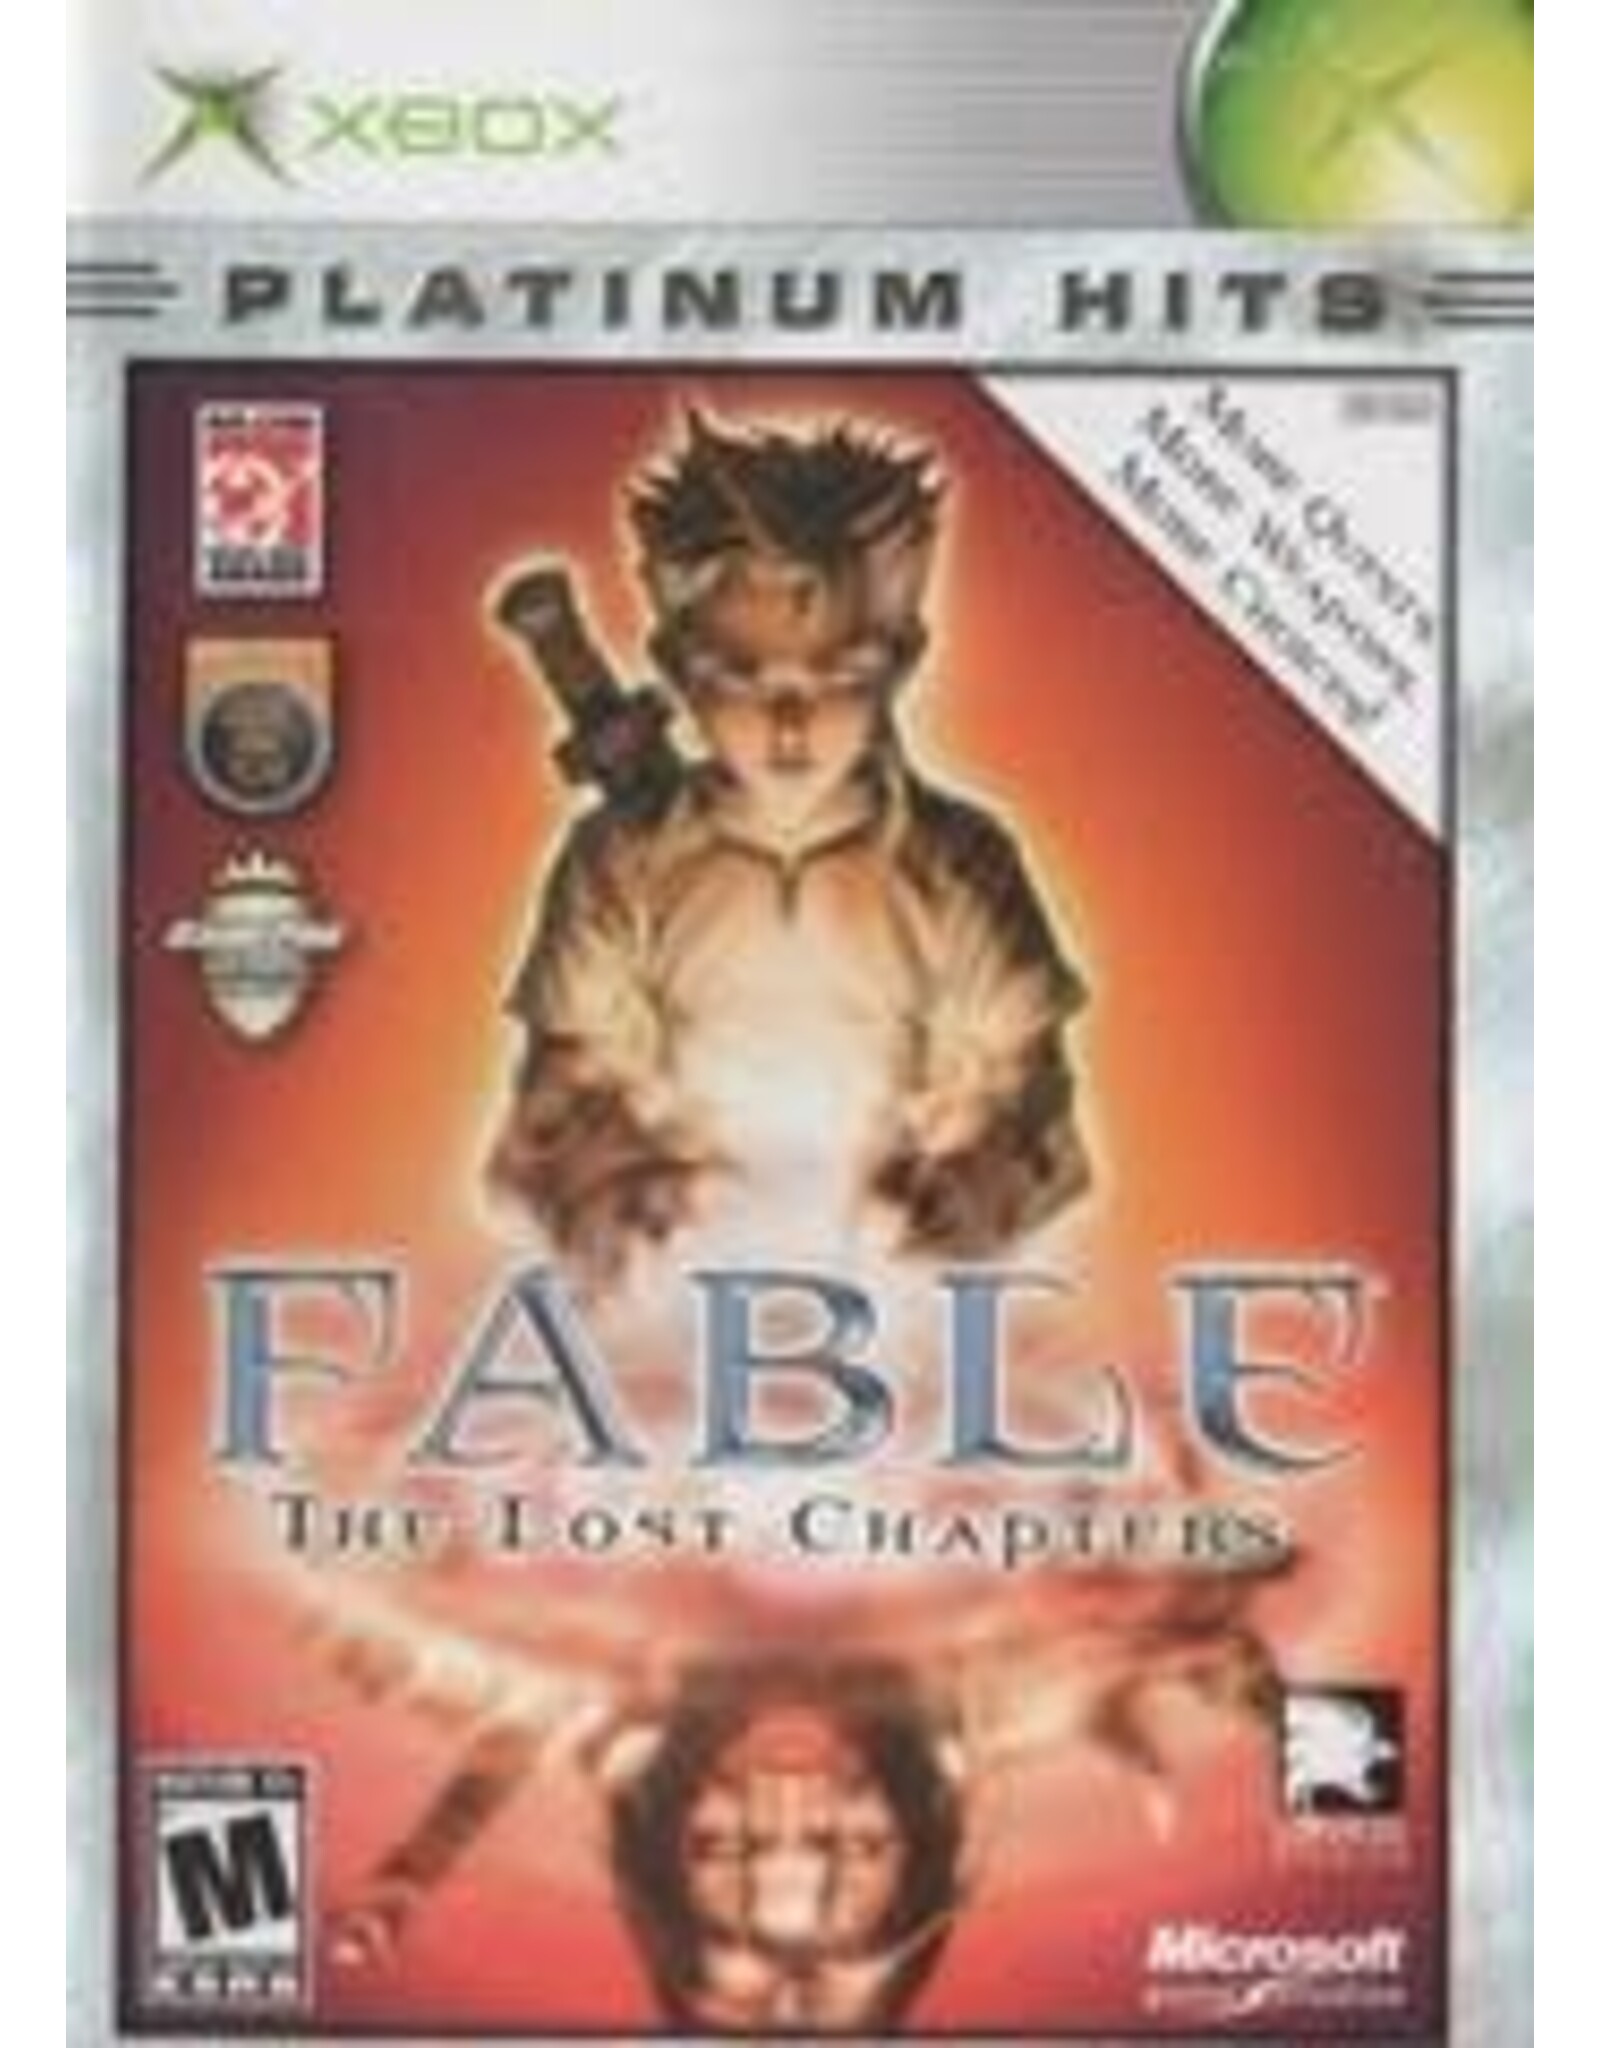 Xbox Fable the Lost Chapters (Platinum Hits, No Manual)